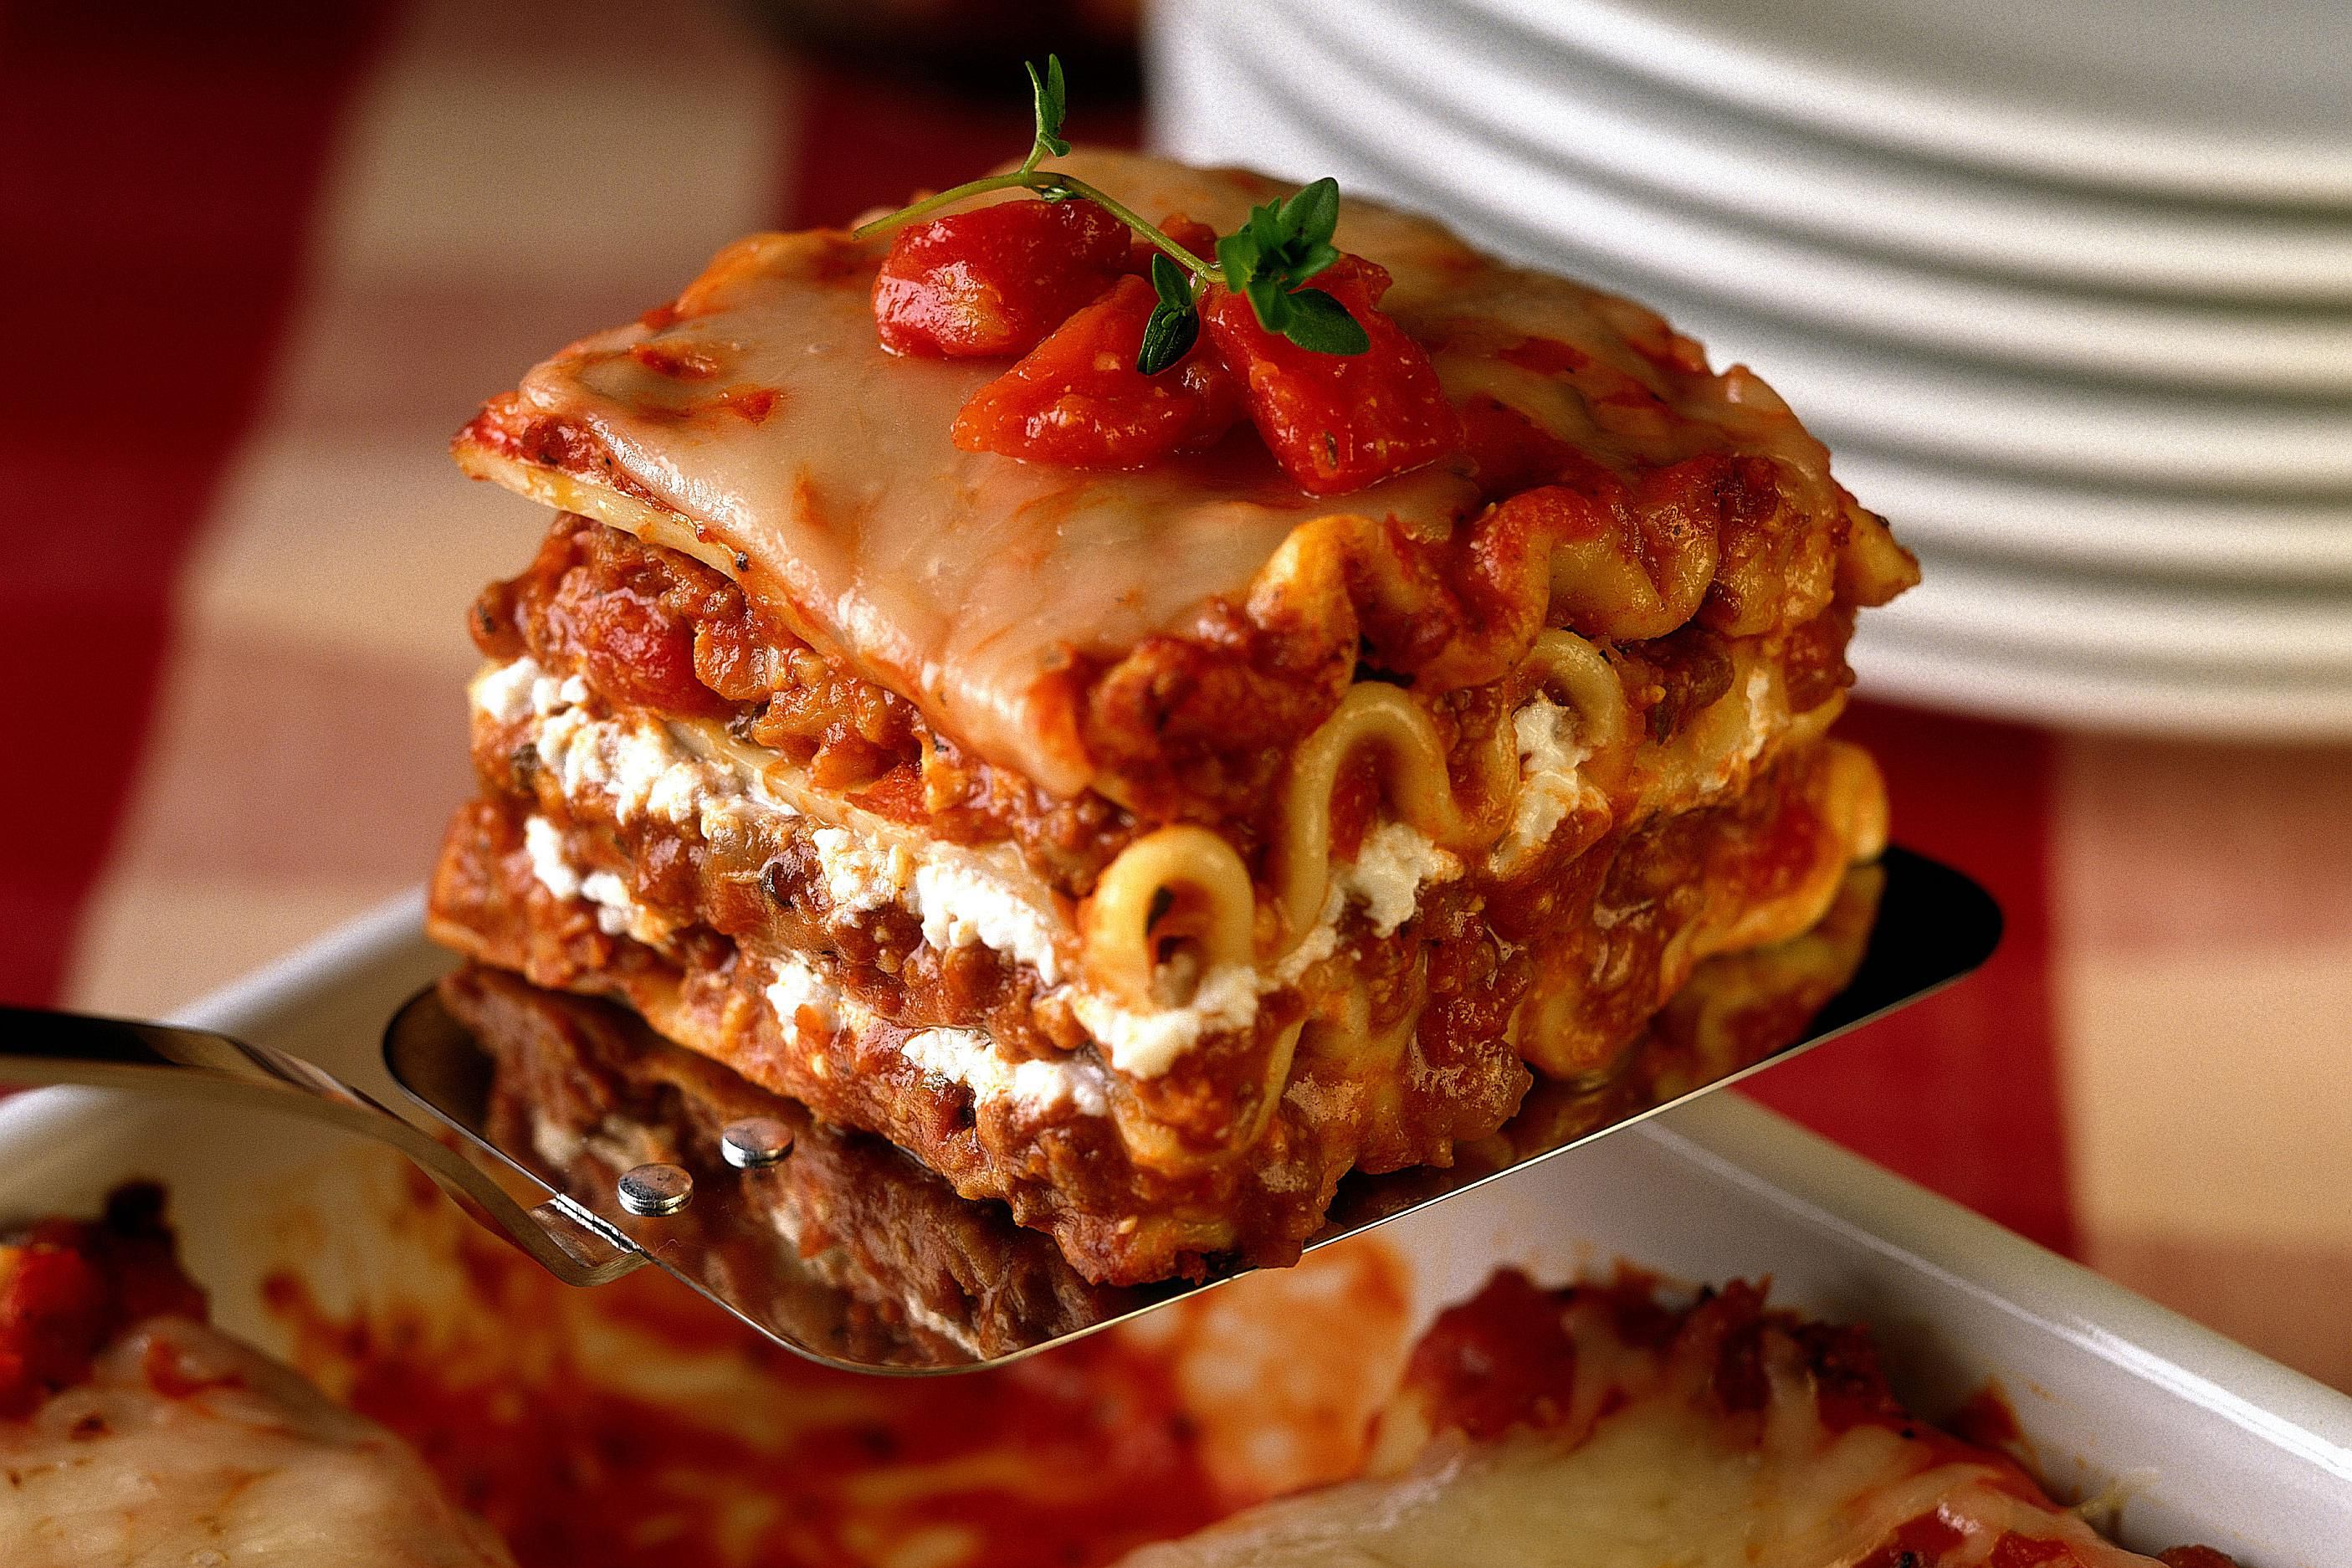 This is a picture of lasagna